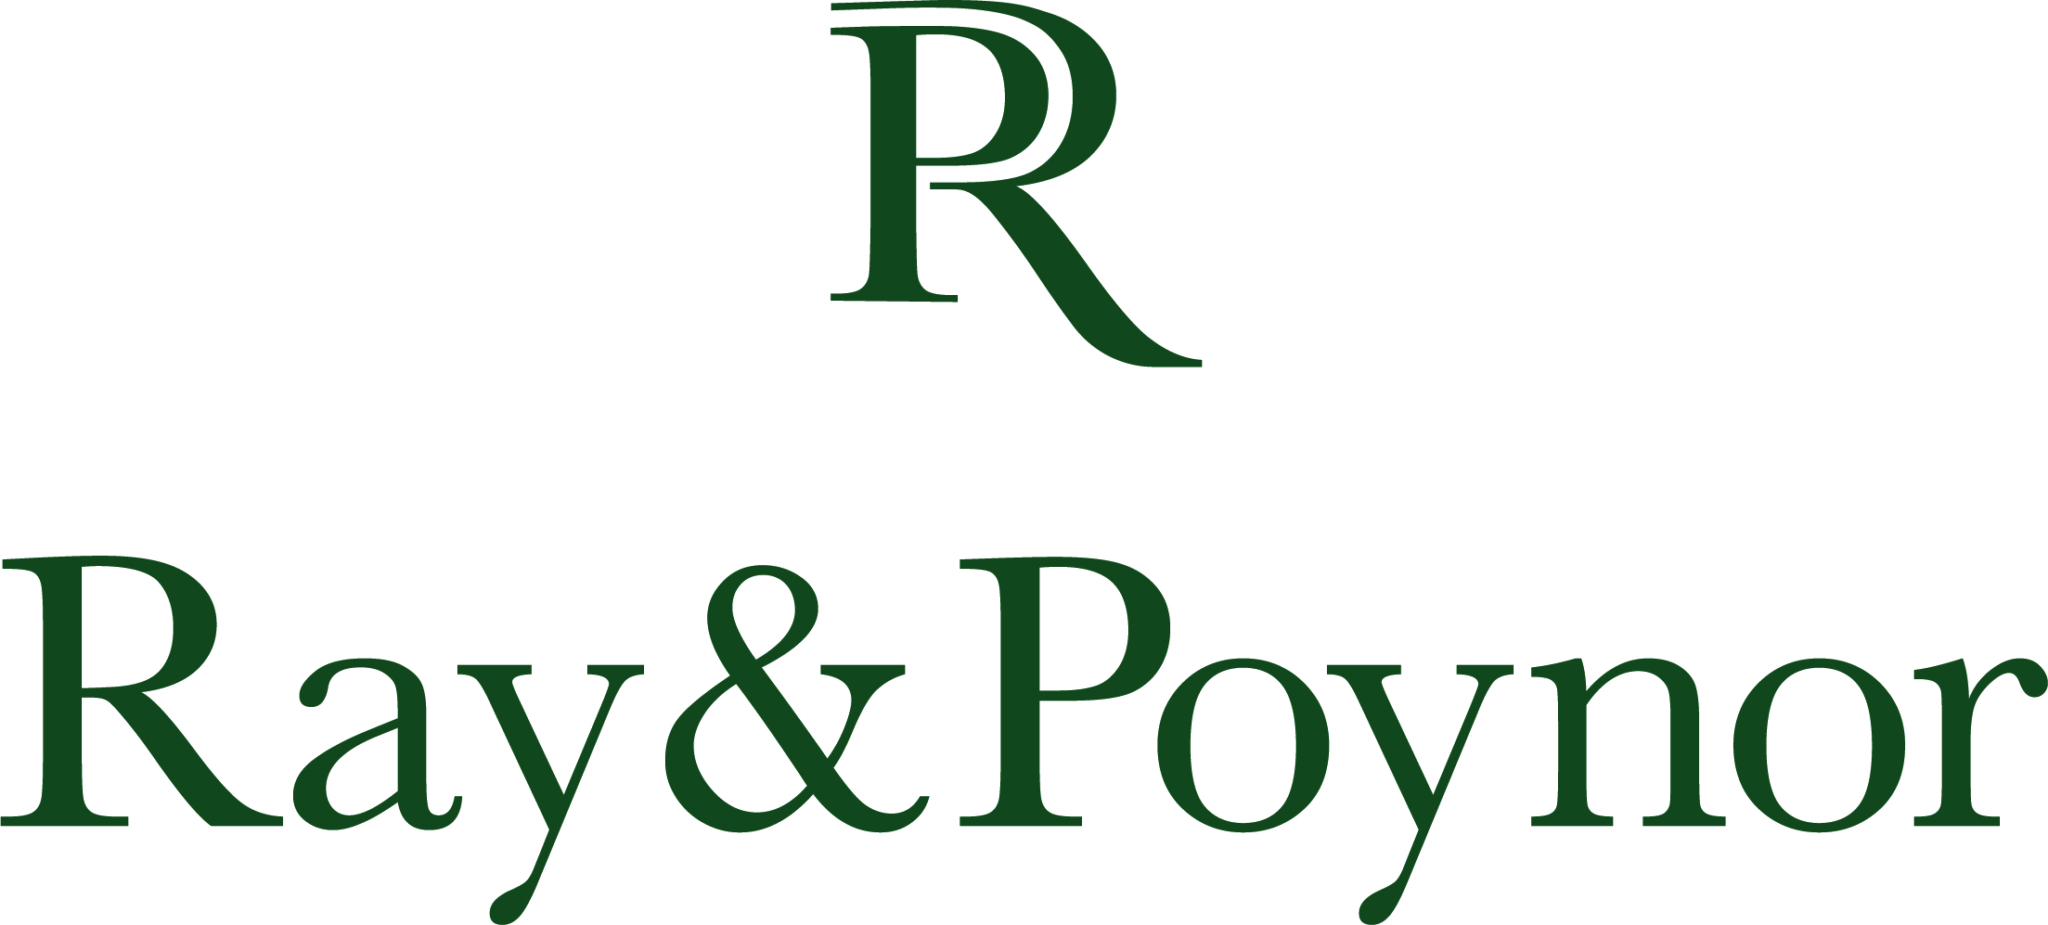 RayP Logos Final Stacked Larger Type Green What can you expect for 2021 Birmingham housing trends? The experts tell us